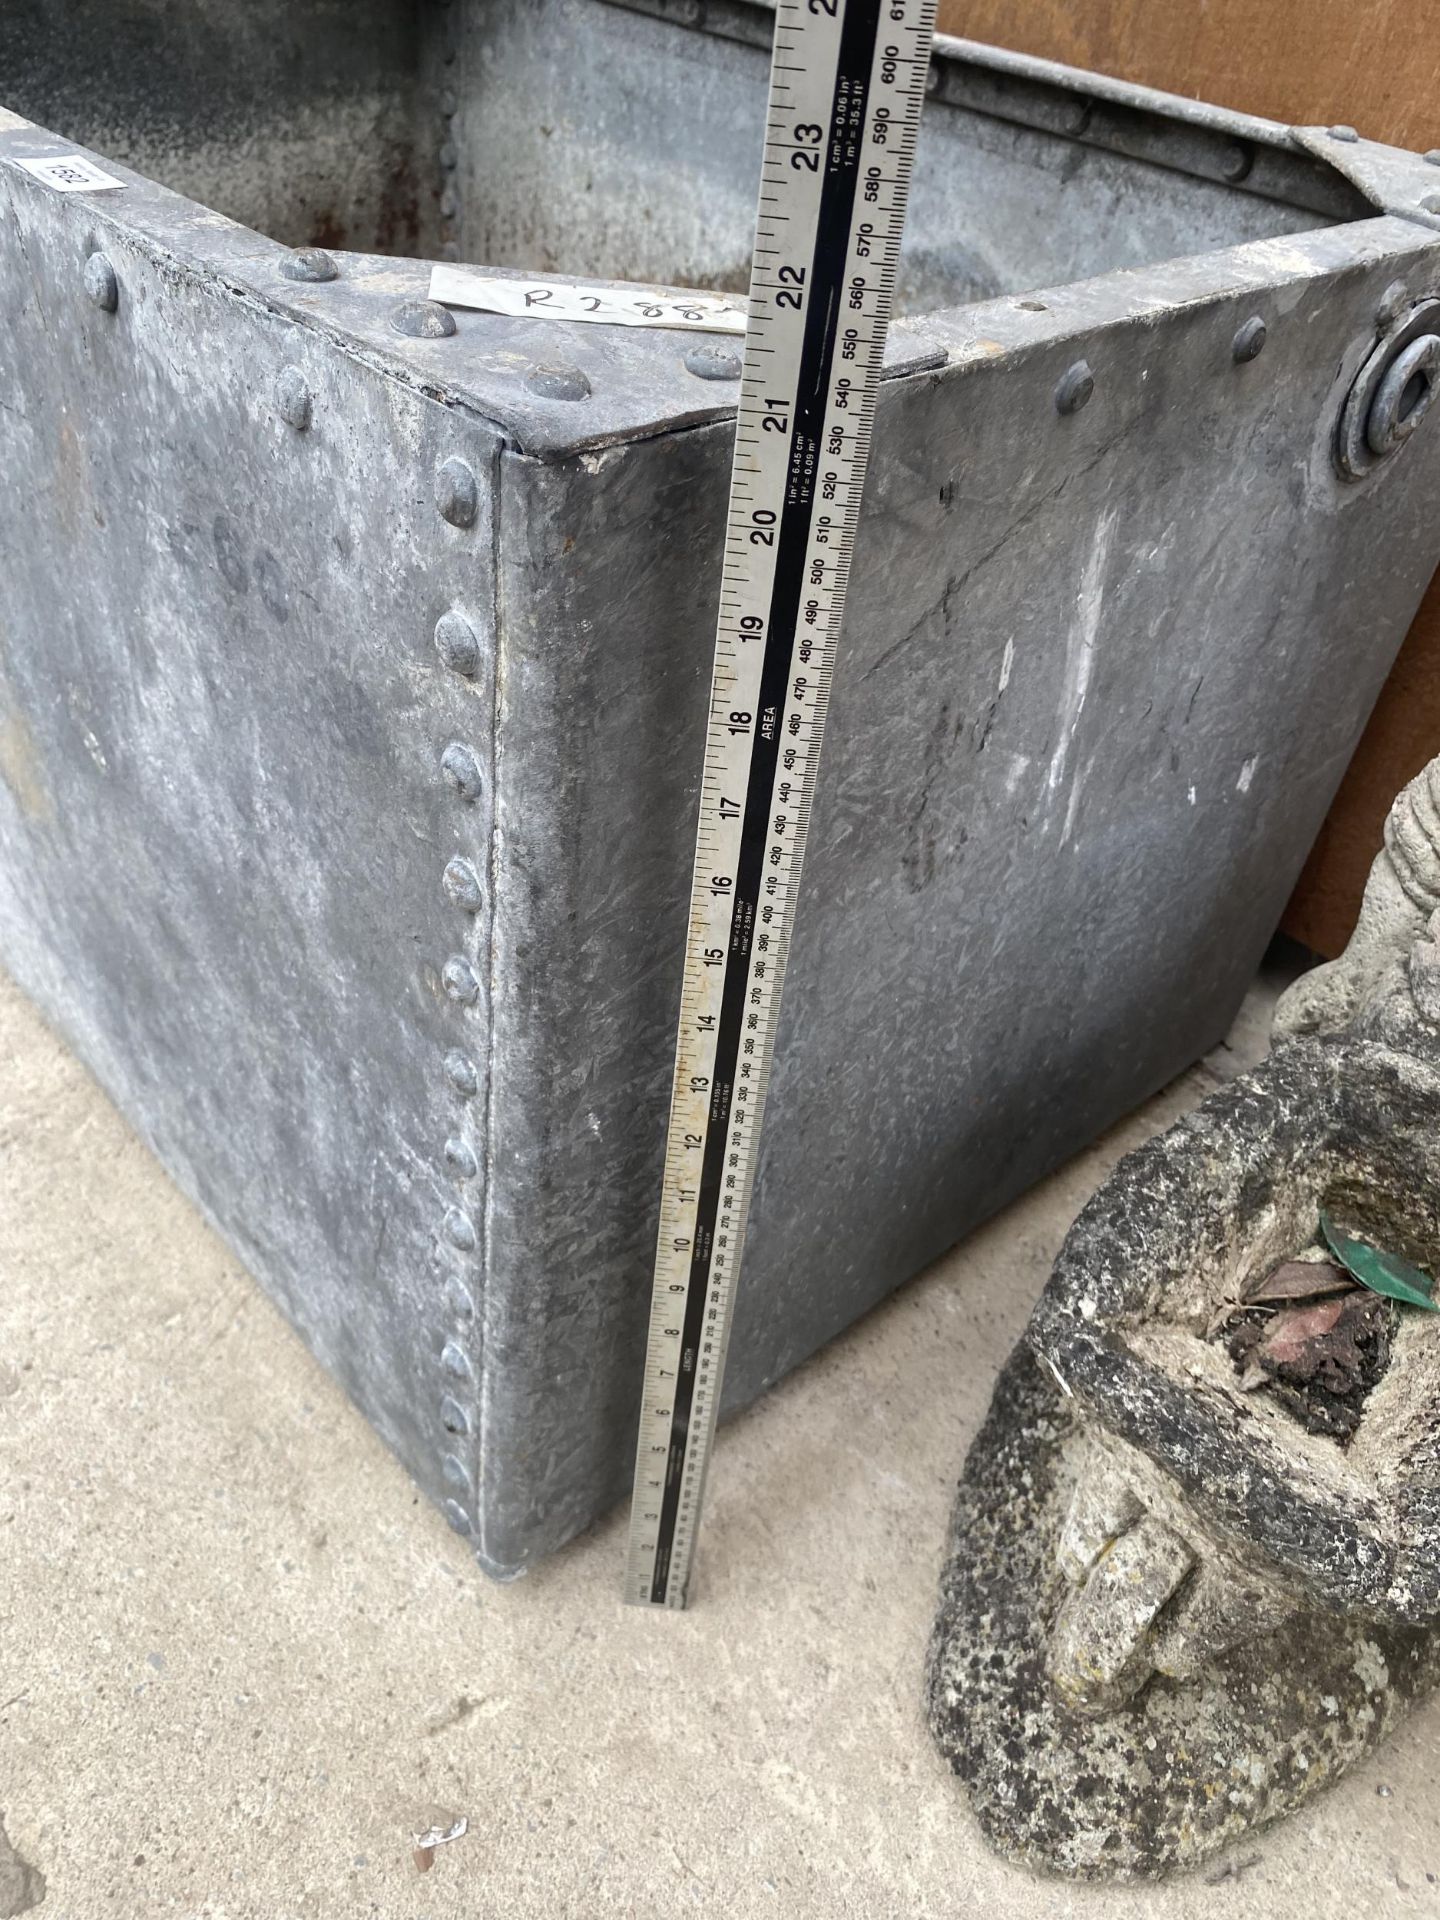 A LARGE GALVANISED WATER TANK PLANTER (89CM x 60CM x 51CM) - Image 4 of 4